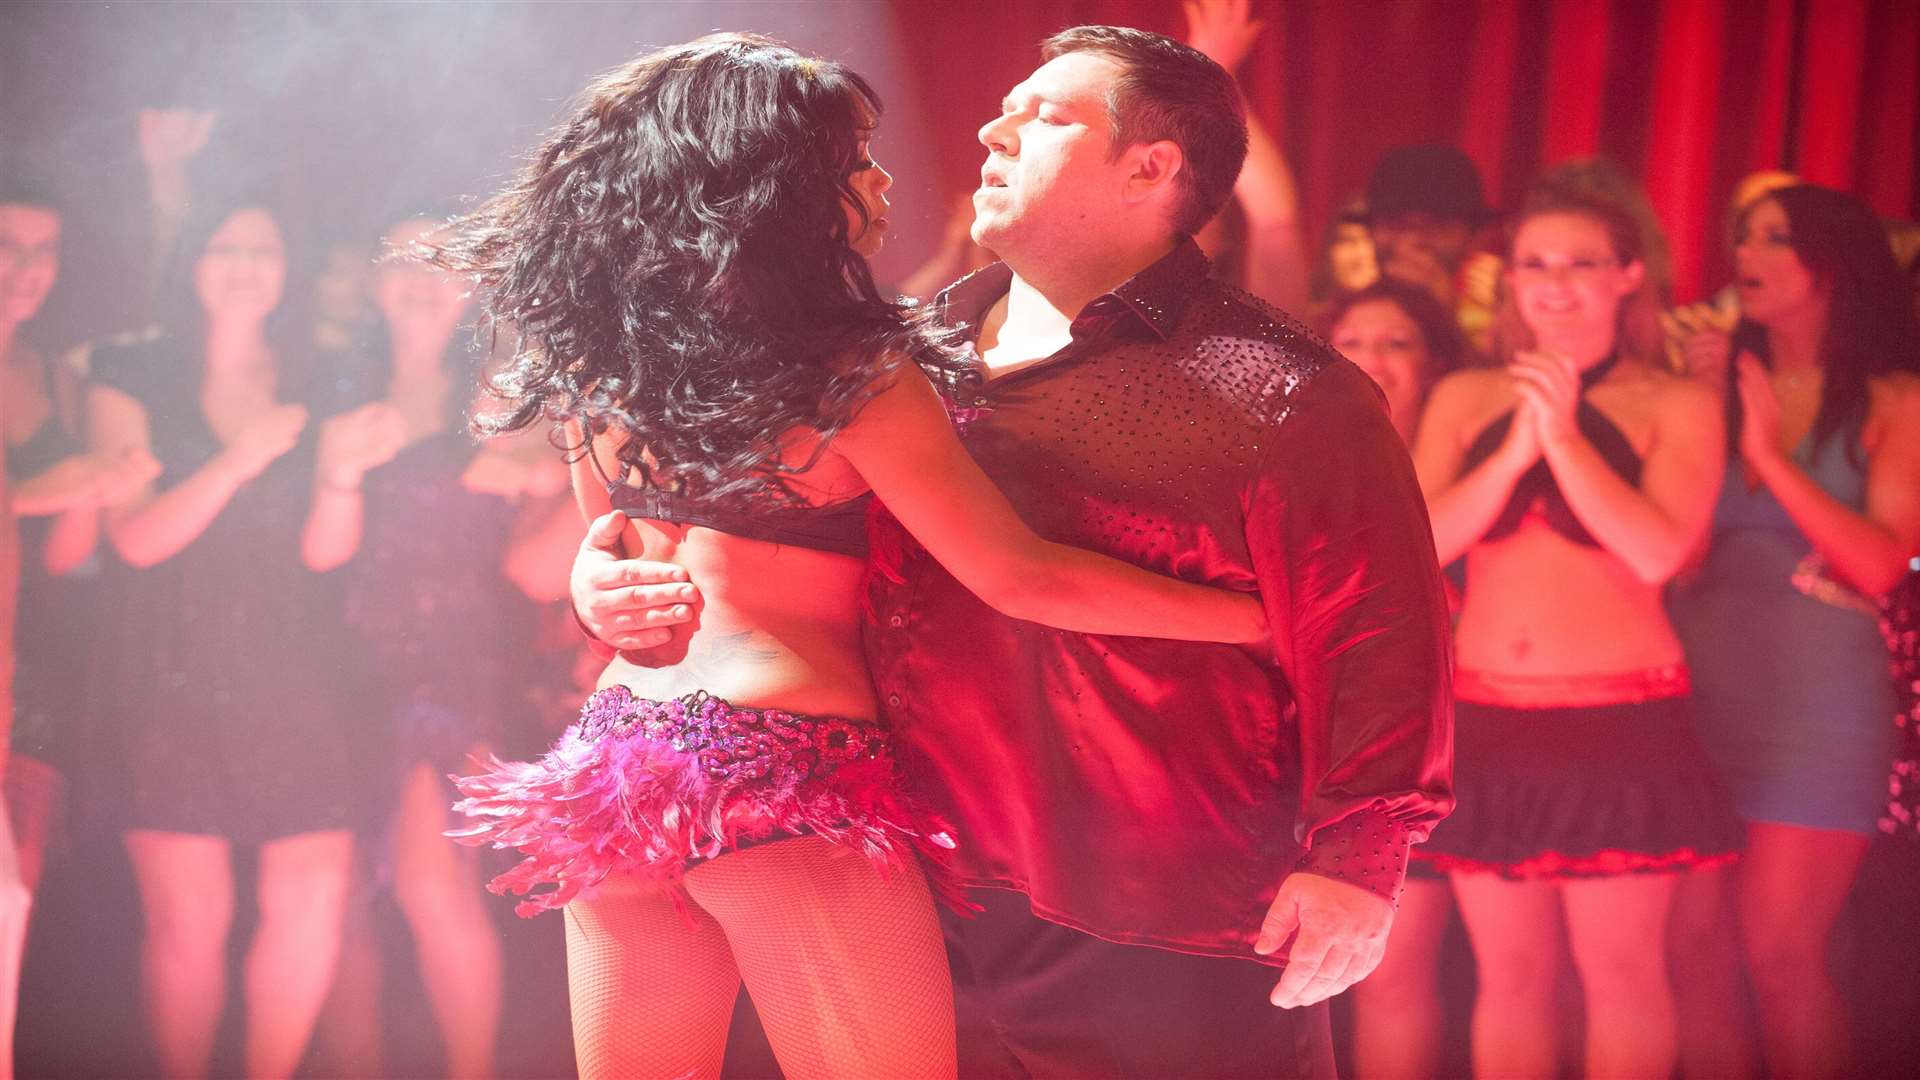 Cuban Fury, with Nick Frost (Bruce Garrett). Picture: P A Photo/Studio Canal